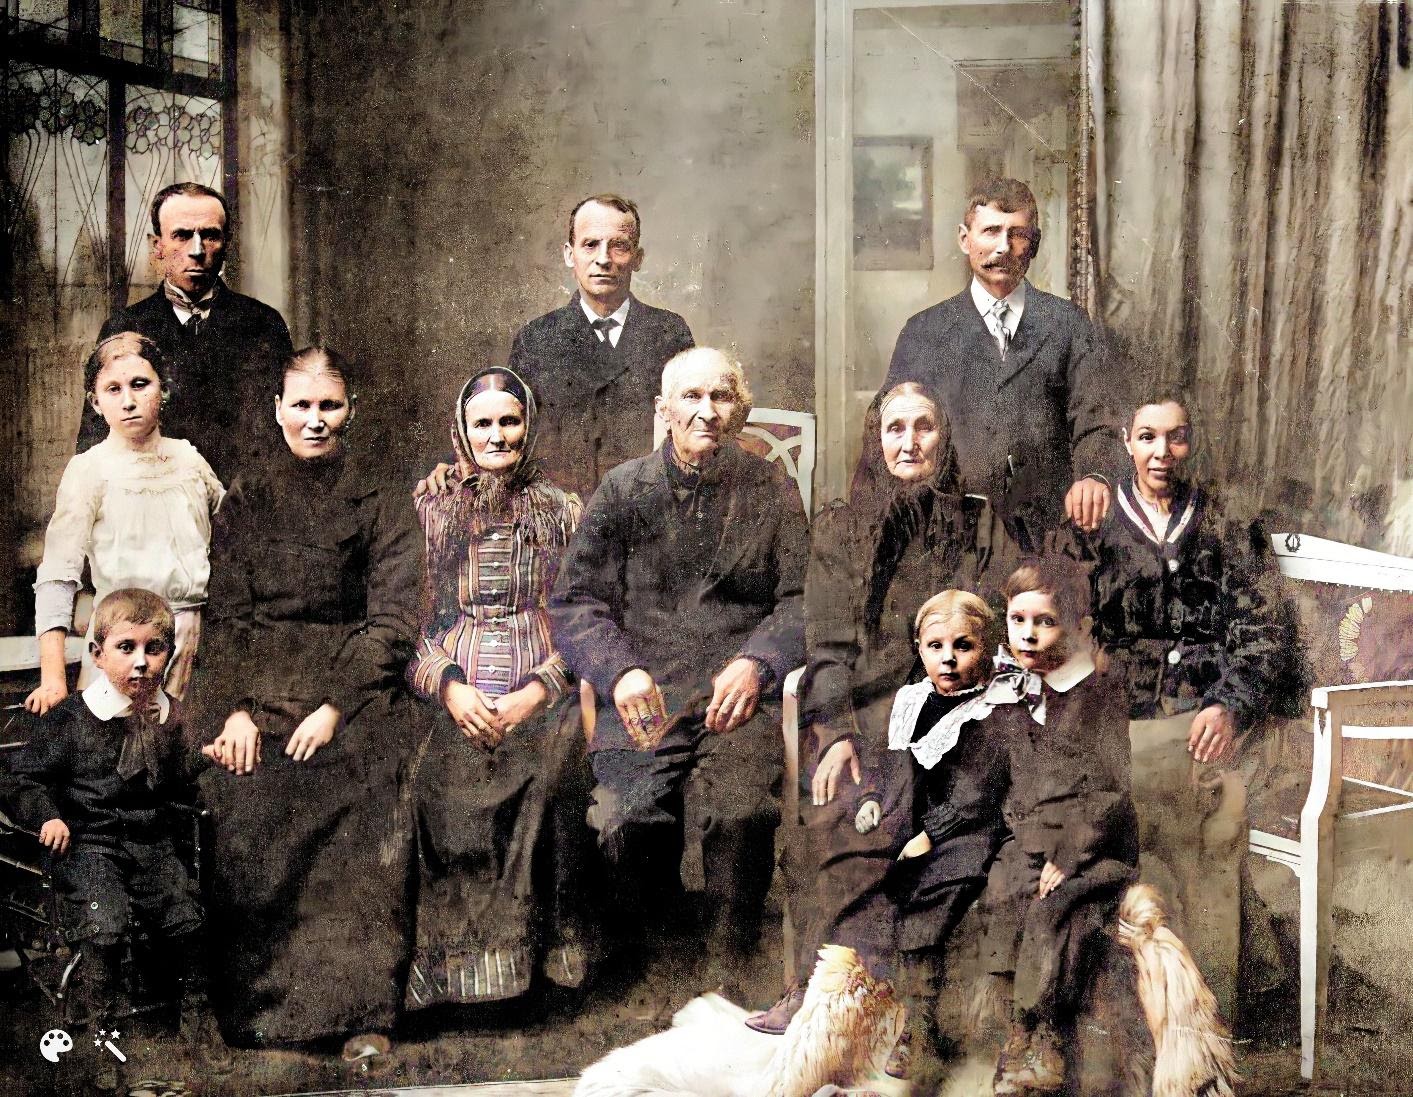 Family of Josef Bayer III., my great-grandfather (back row, far right), circa 1912, including my great-grandmother, his second wife Anna Bayerová, born Vacovská, and his parents (my great-great-grandparents), Josef Bayer II. and Petronilla Bayerová.